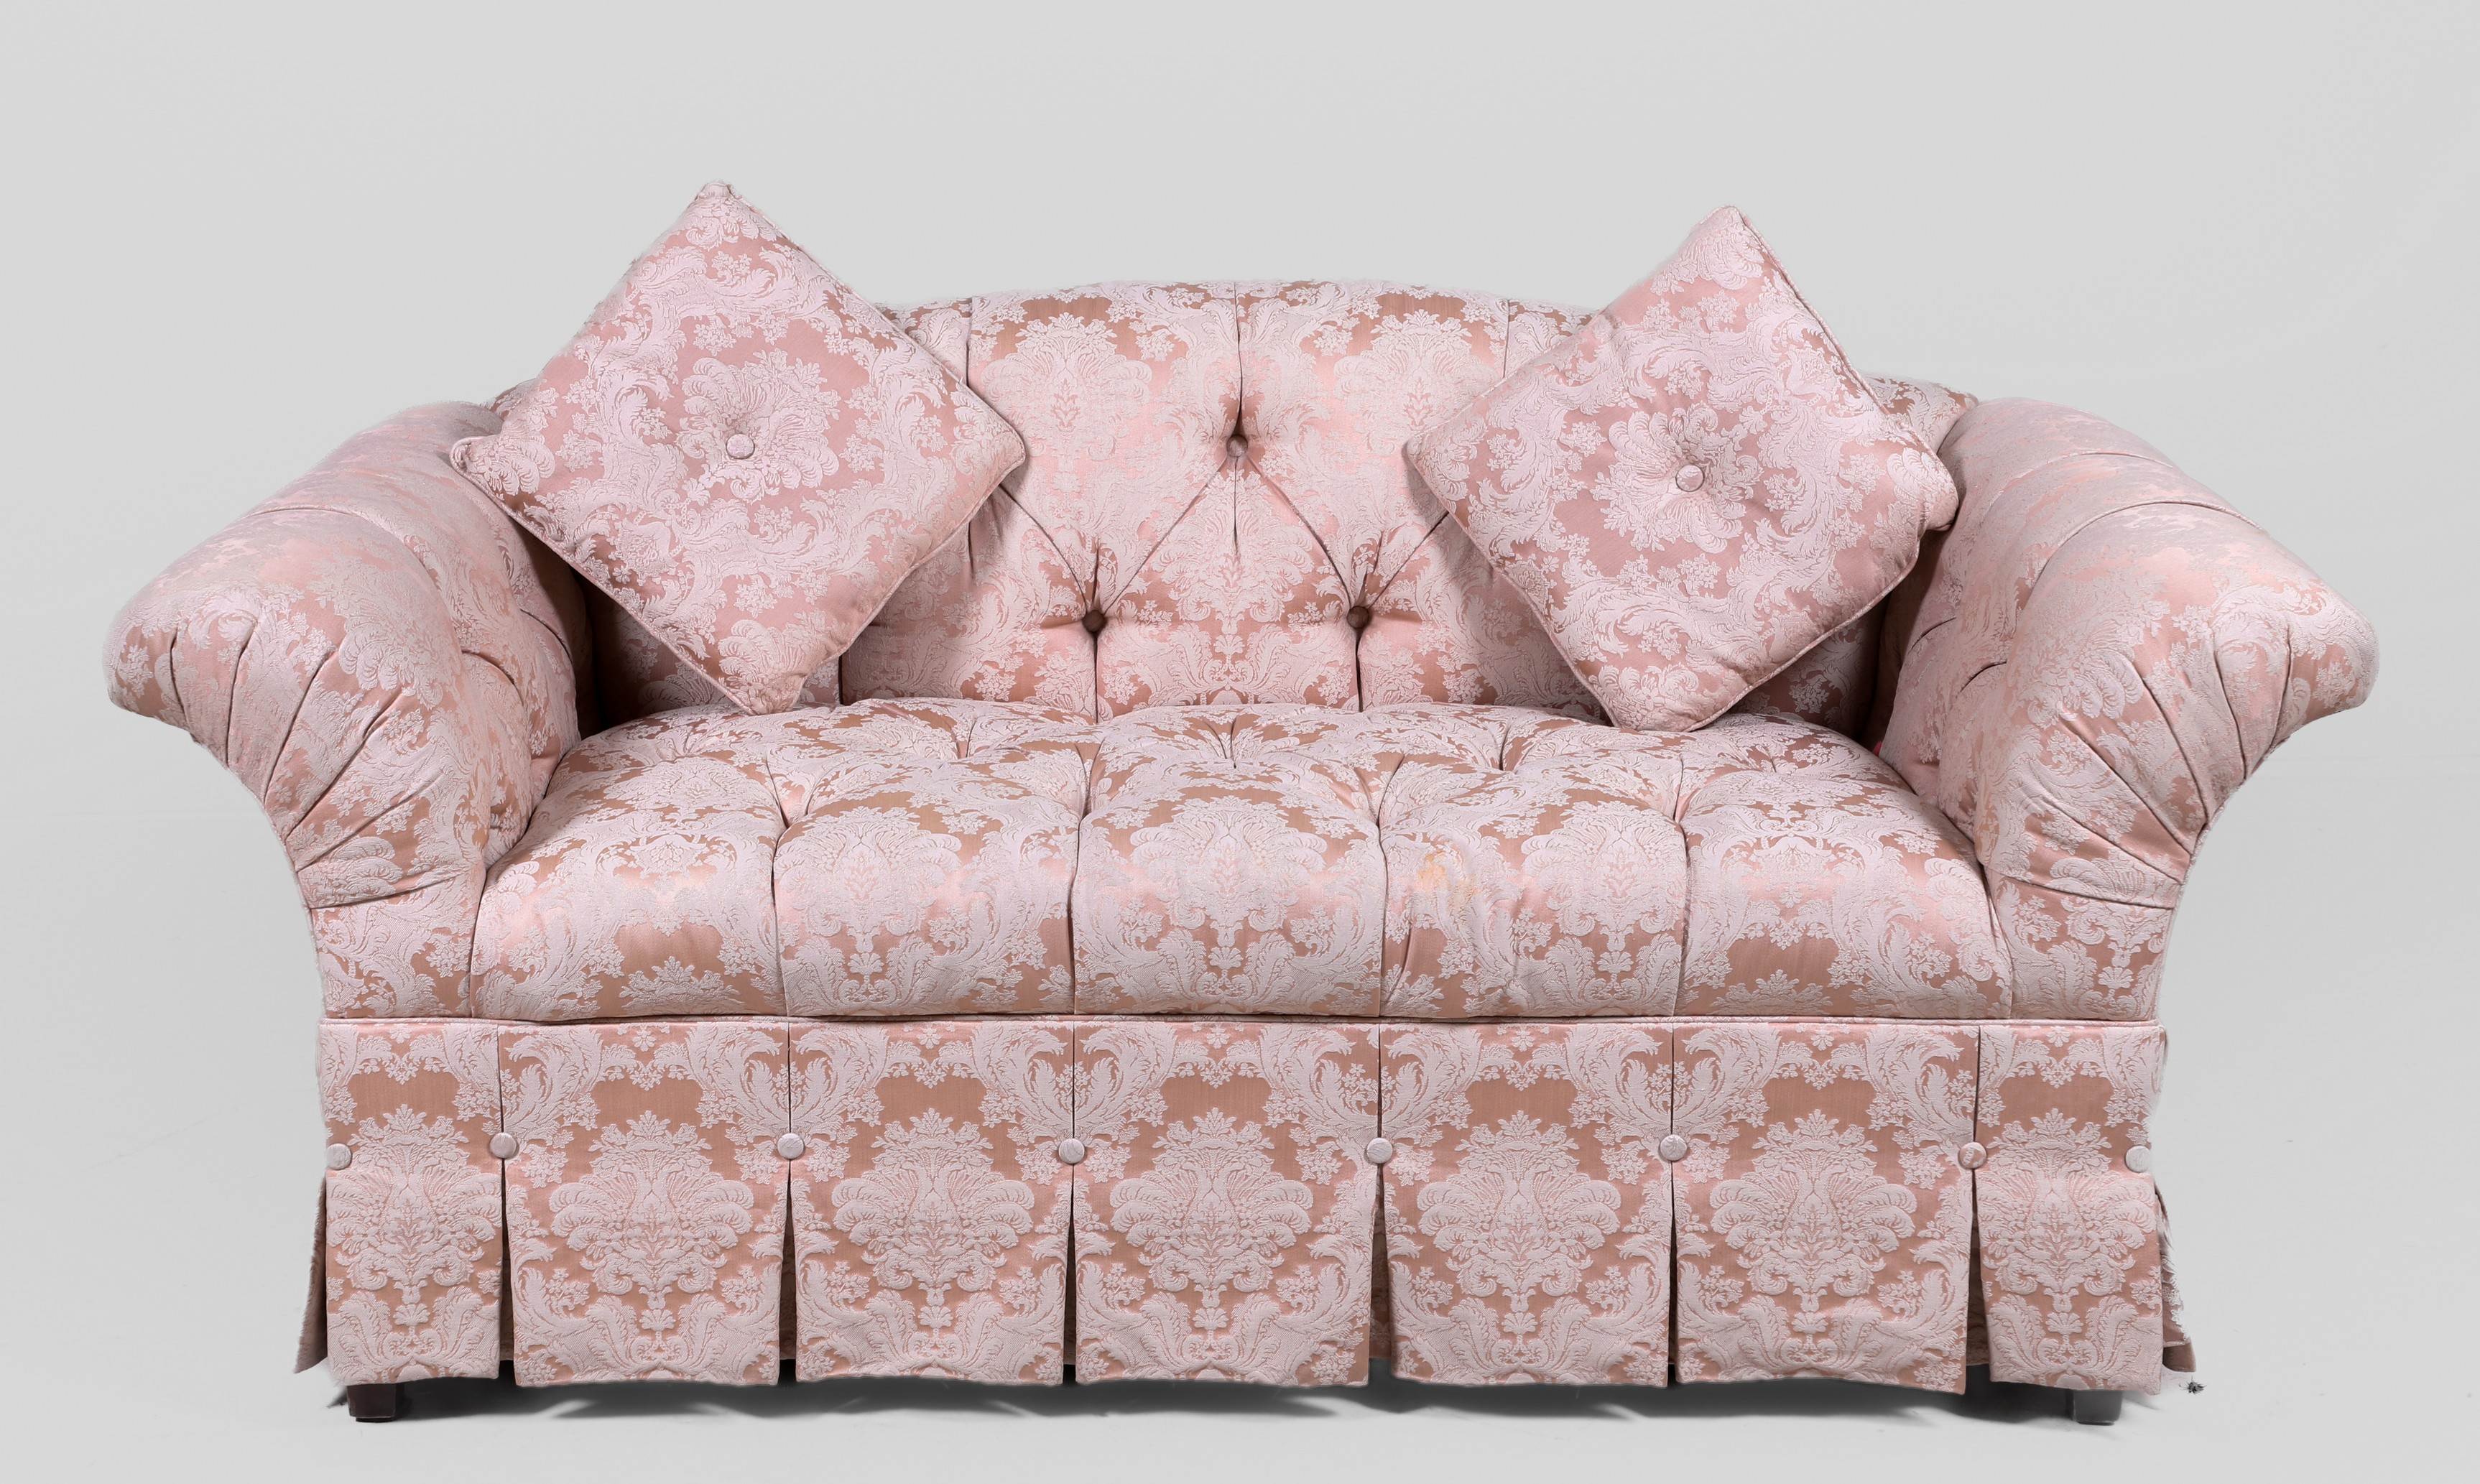 Tufted upholstered sofa, pink and